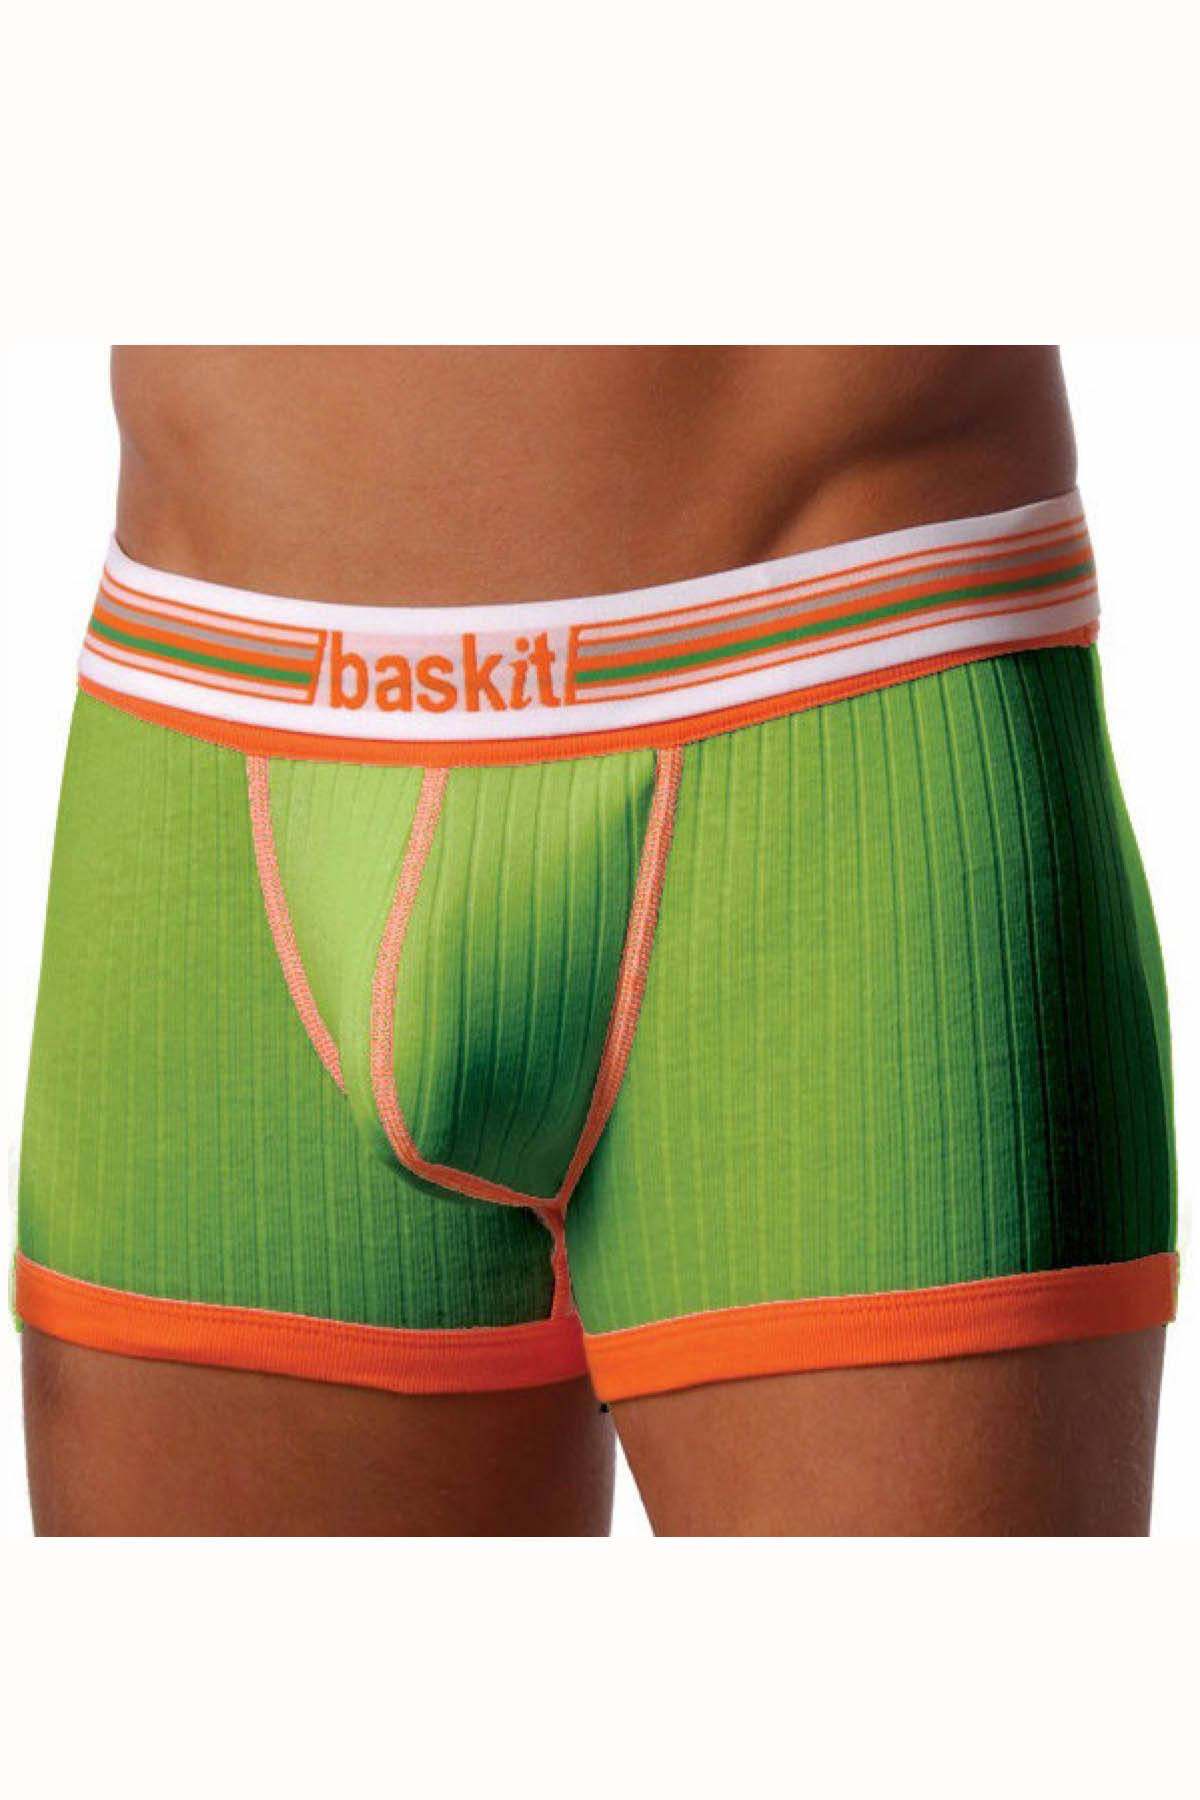 Baskit Palm-Green Ribbed Low-Rise Trunk